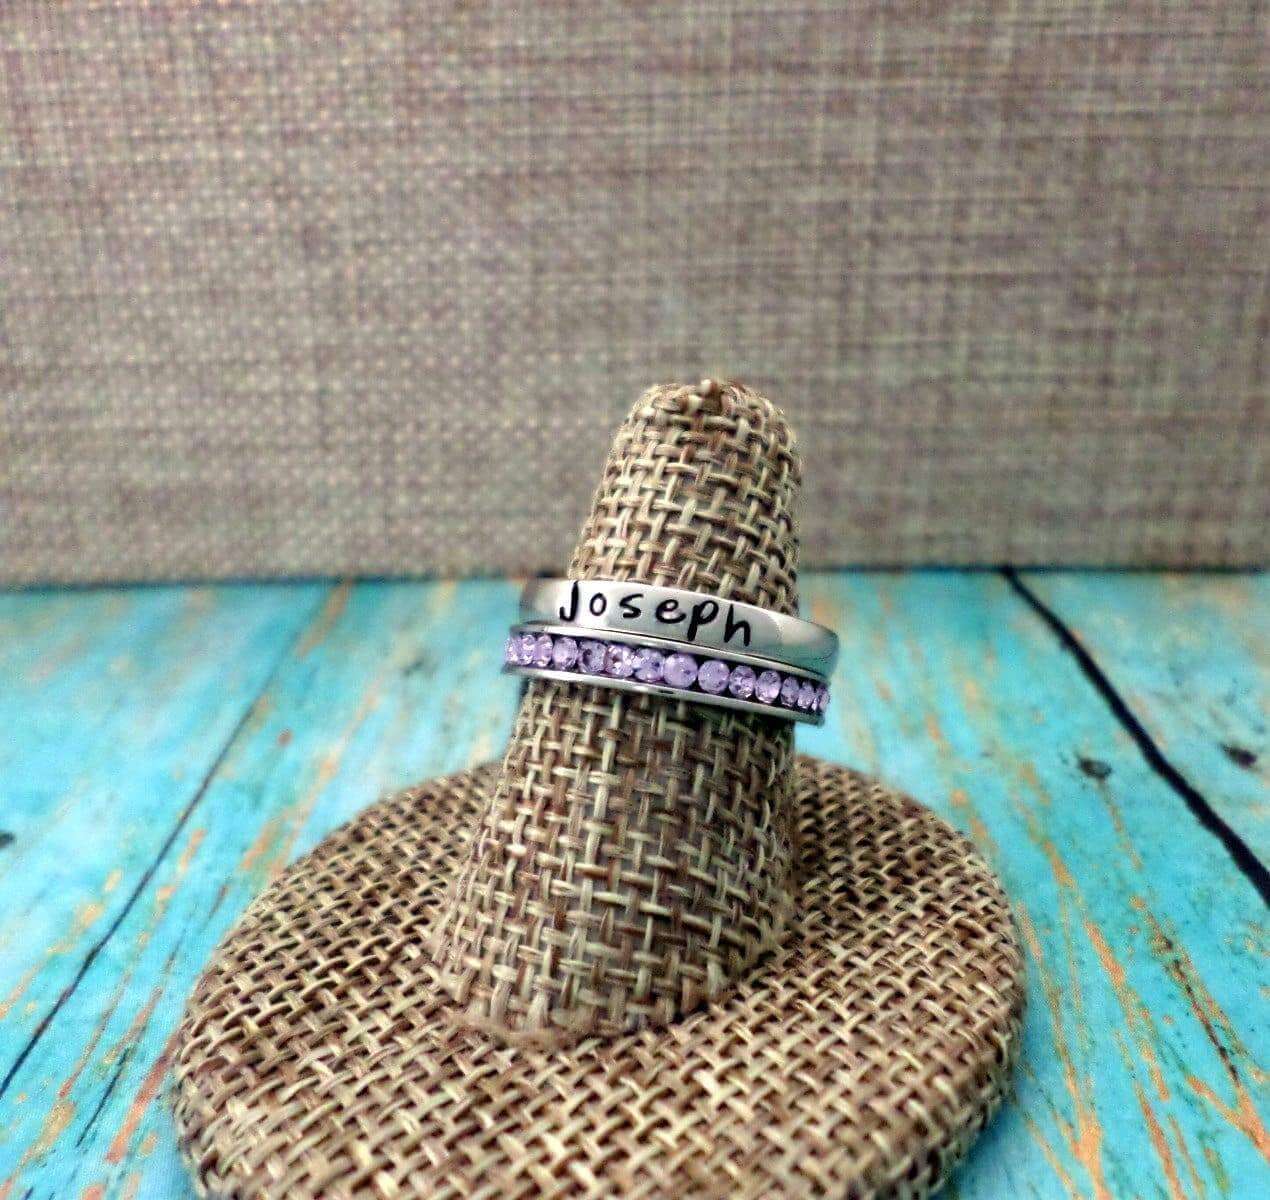 Stackable Name Rings, Eternity rings, Stainless Steel Ring, Matching Rings, Name Rings, Comfort Fit, Rings, HandmadeLoveStories, HandmadeLoveStories , [Handmade_Love_Stories], [Hand_Stamped_Jewelry], [Etsy_Stamped_Jewelry], [Etsy_Jewelry]